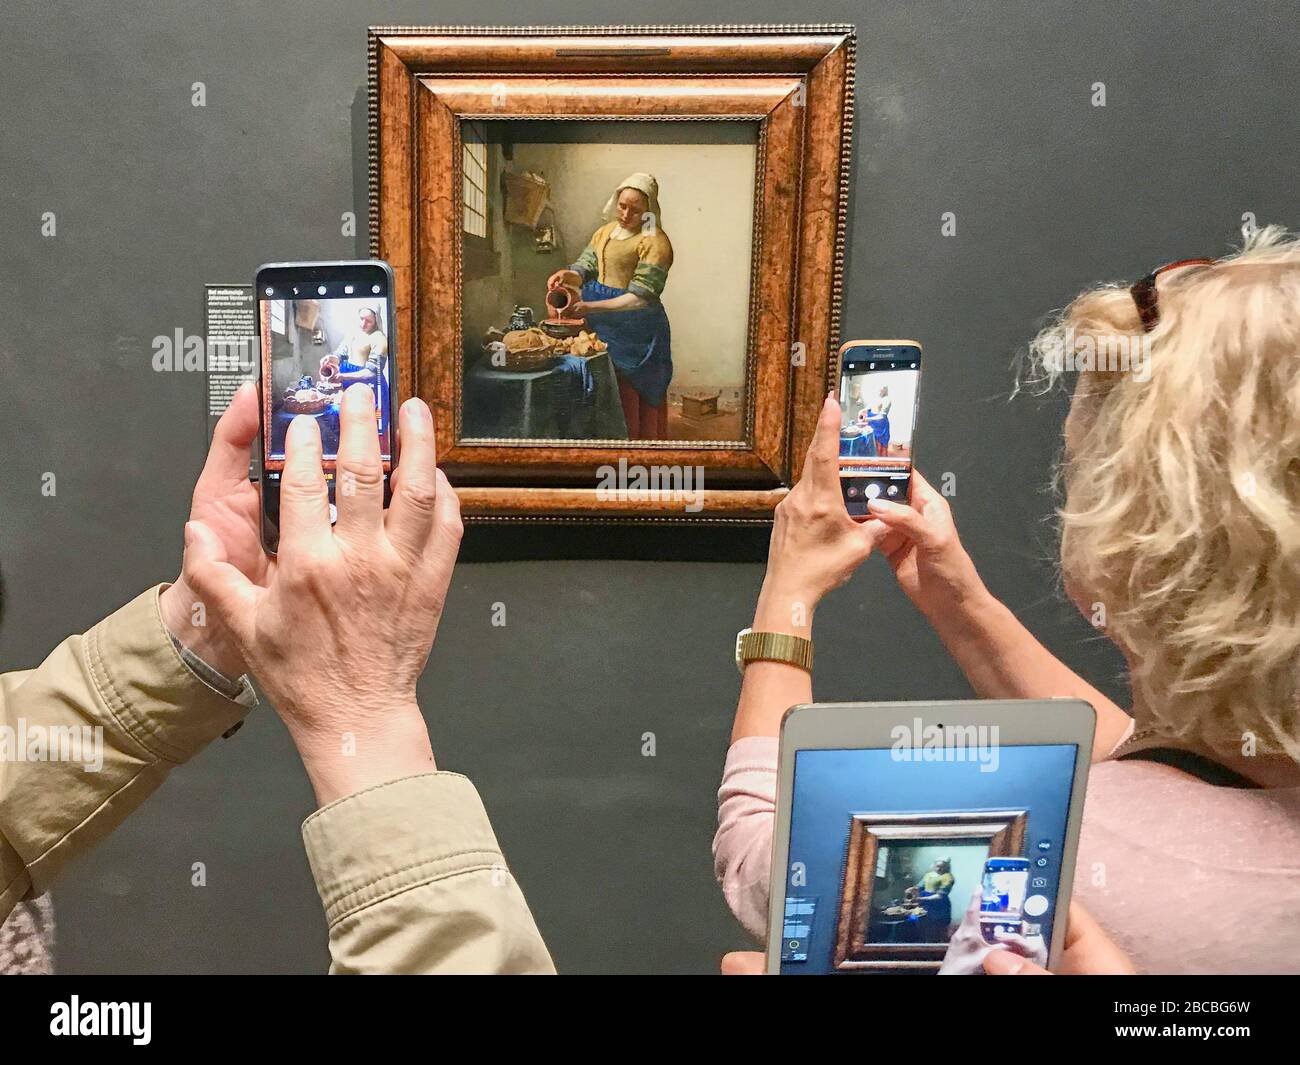 Jan Vermeer's painting The Milkmaid in the Rijksmuseum in Amsterdam is a visitor magnet. Stock Photo